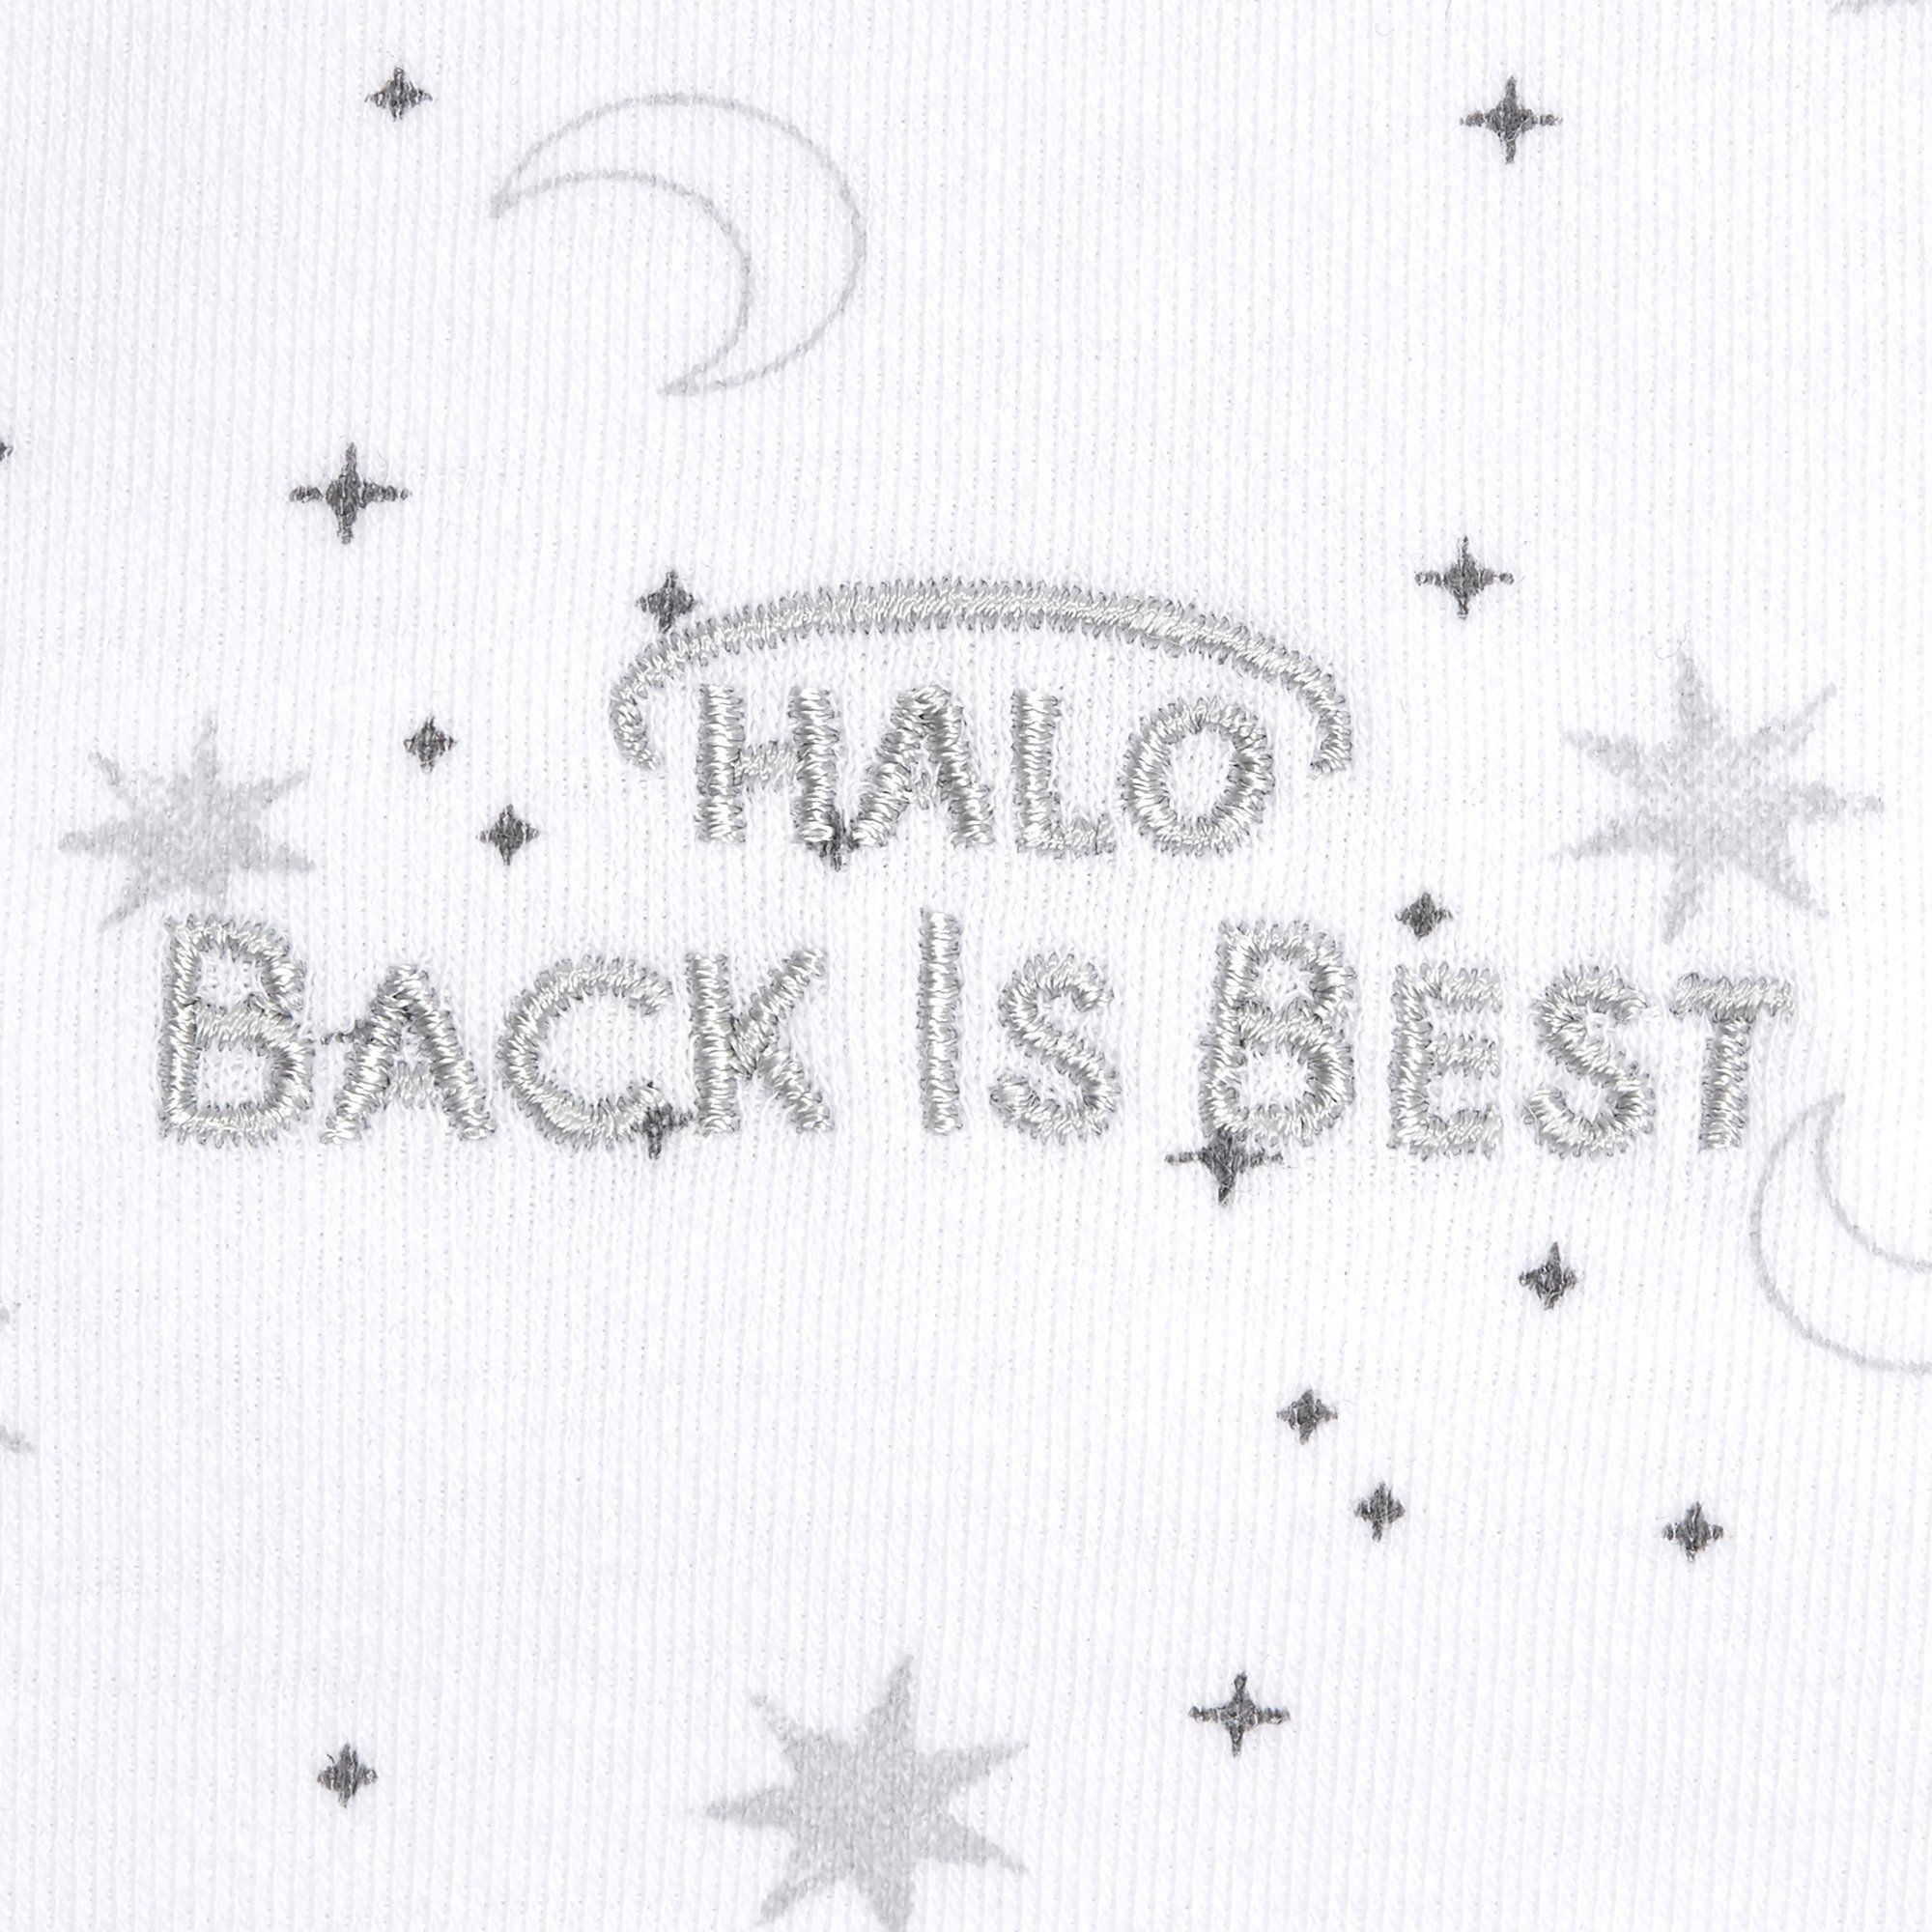 HALO SleepSack Swaddle, Midnight Moons Gray, Small (3 to 6 Months) - 1 ct